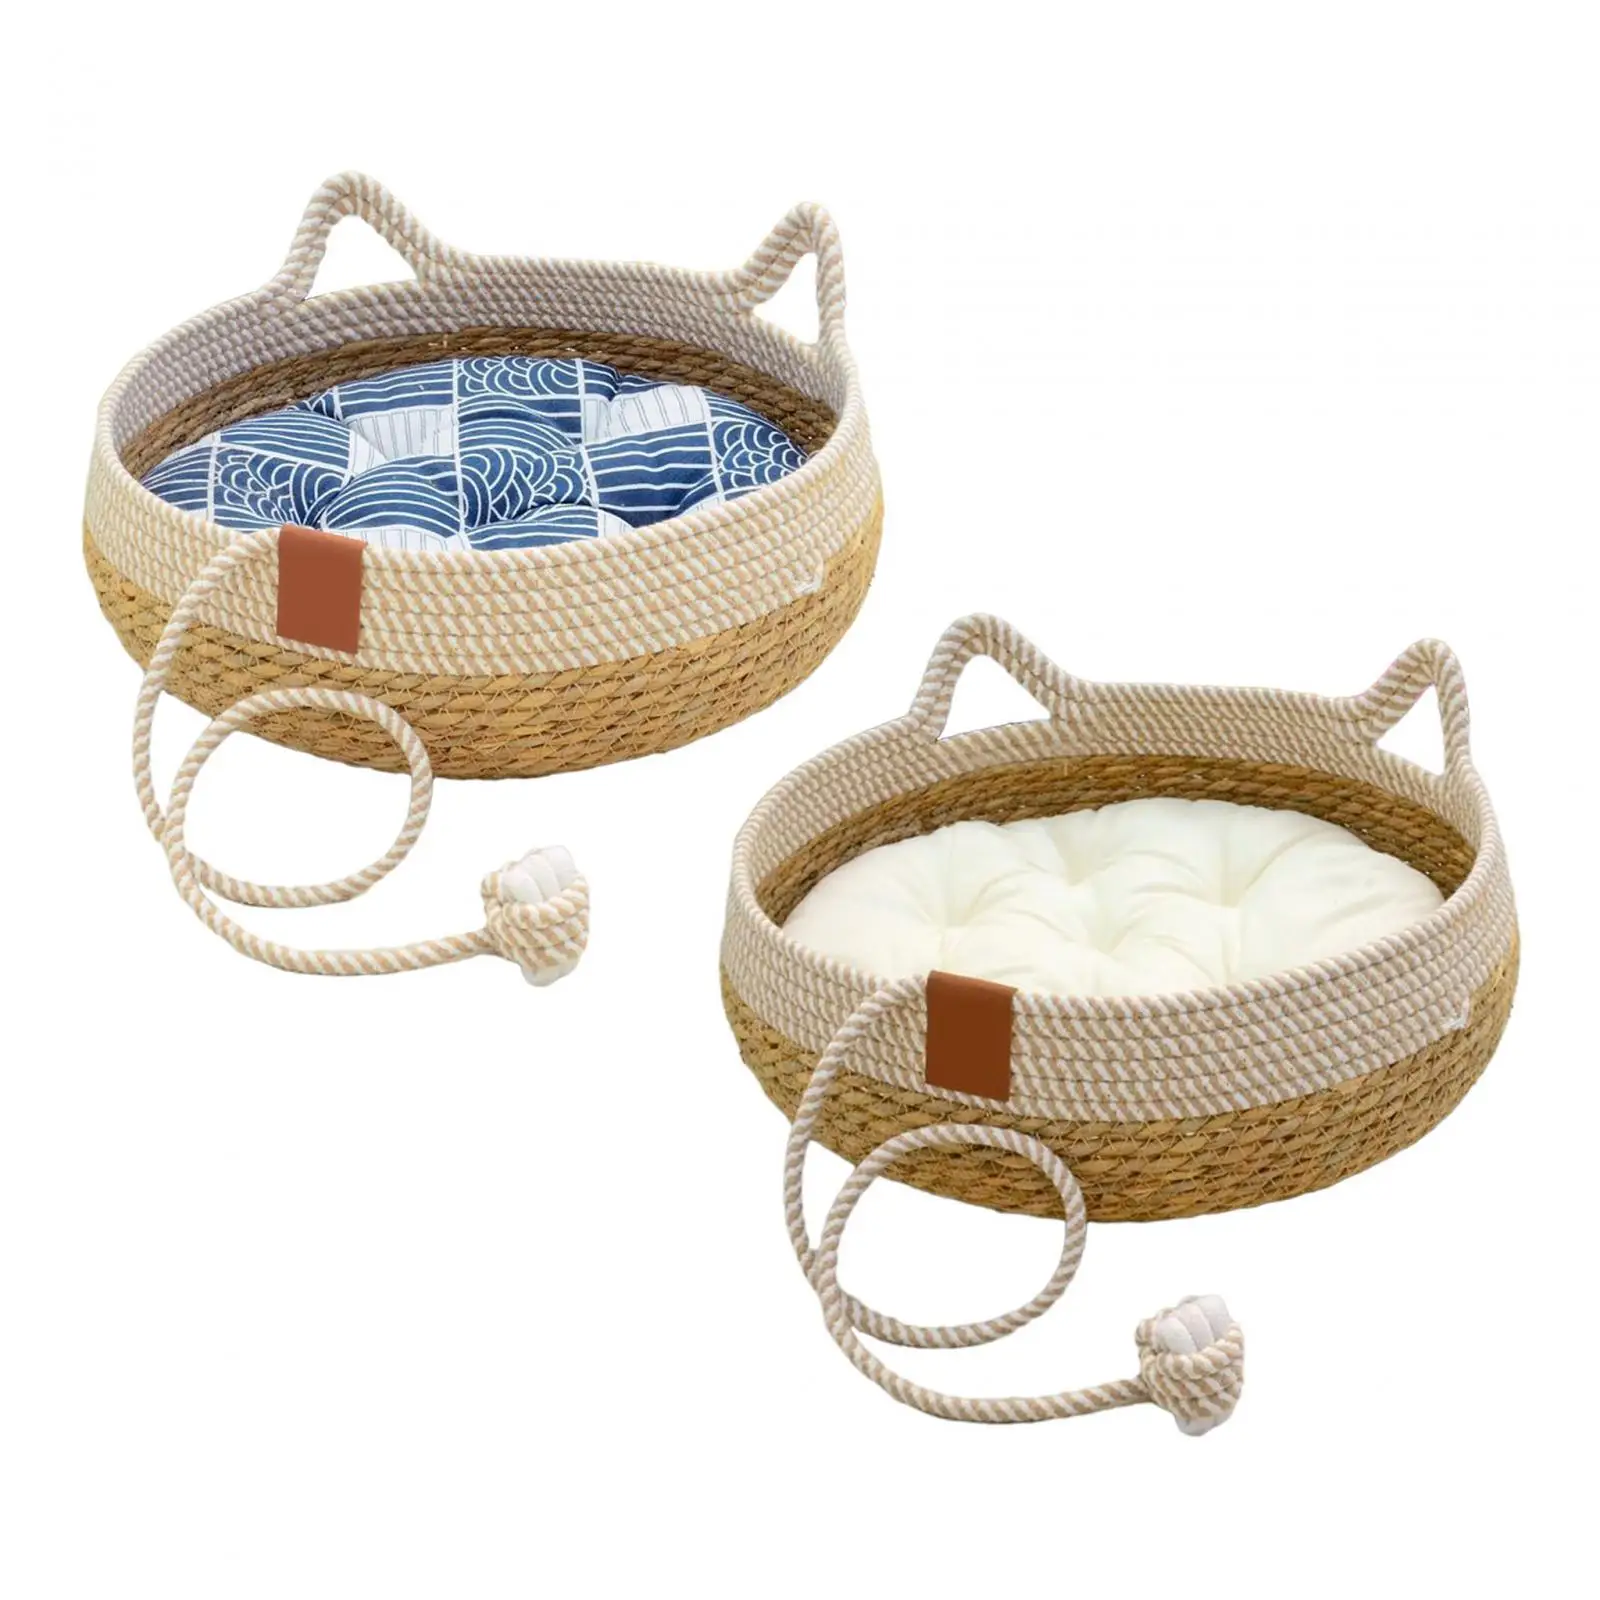 Cat Bed Breathable Comfortable Pet Bed for Indoor Summer Cats or Small Dogs